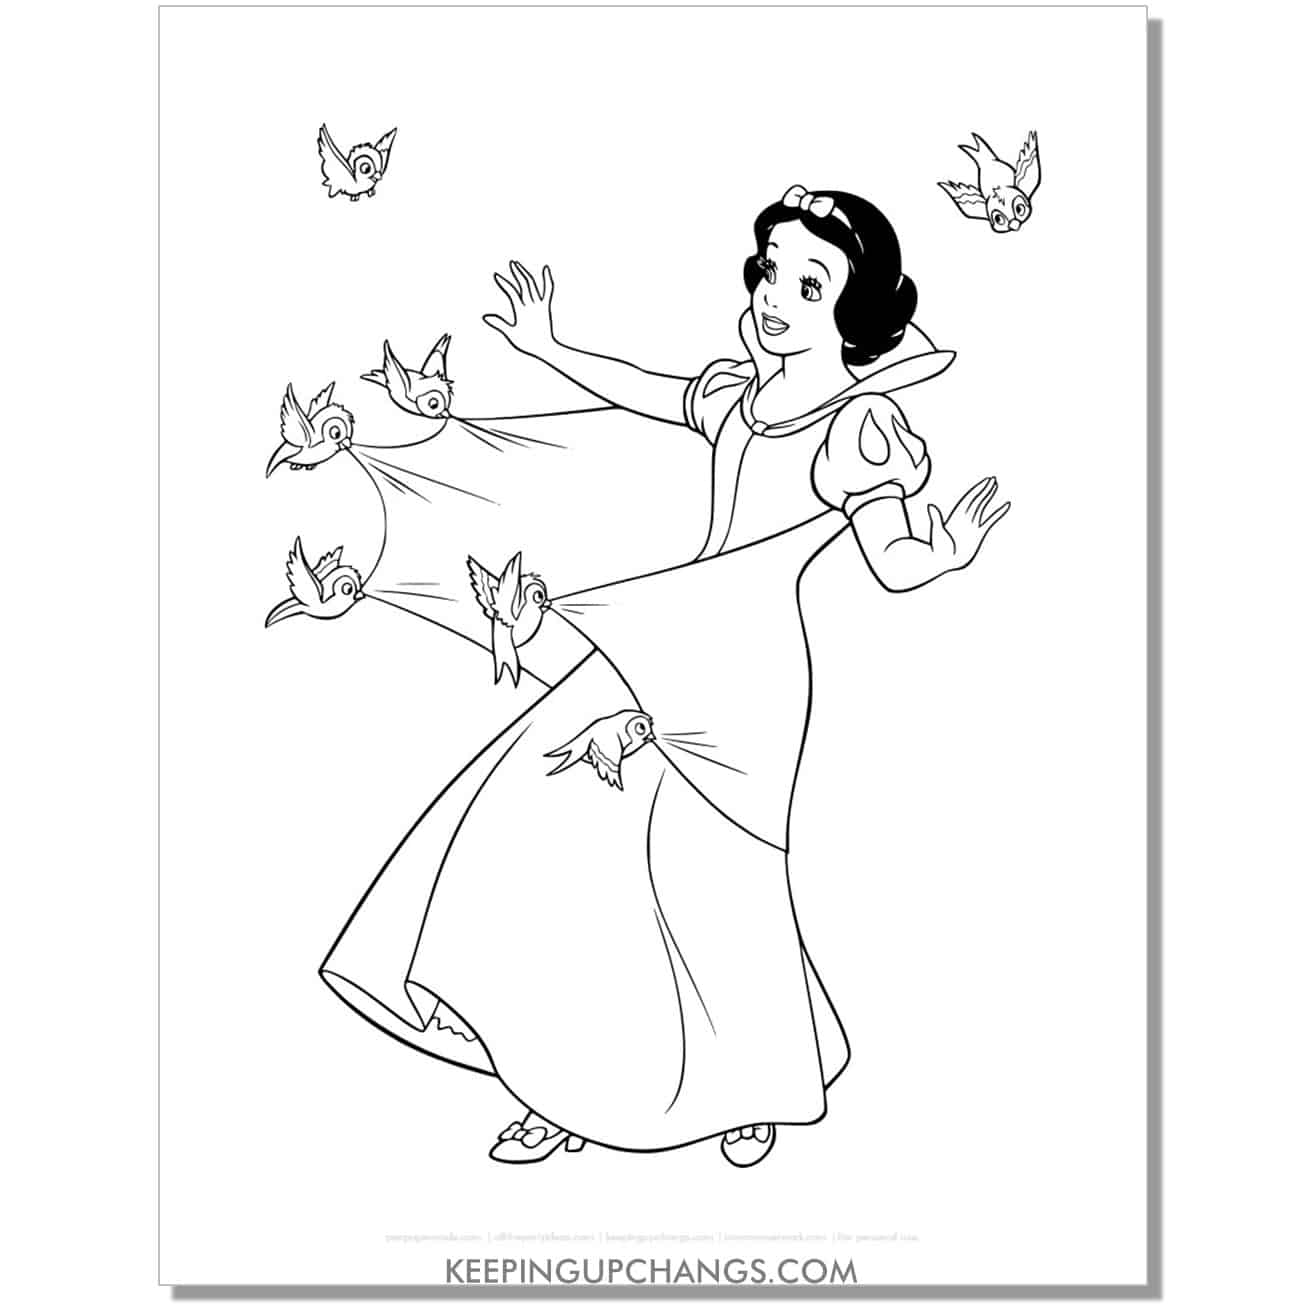 snow white playing with birds coloring page, sheet.